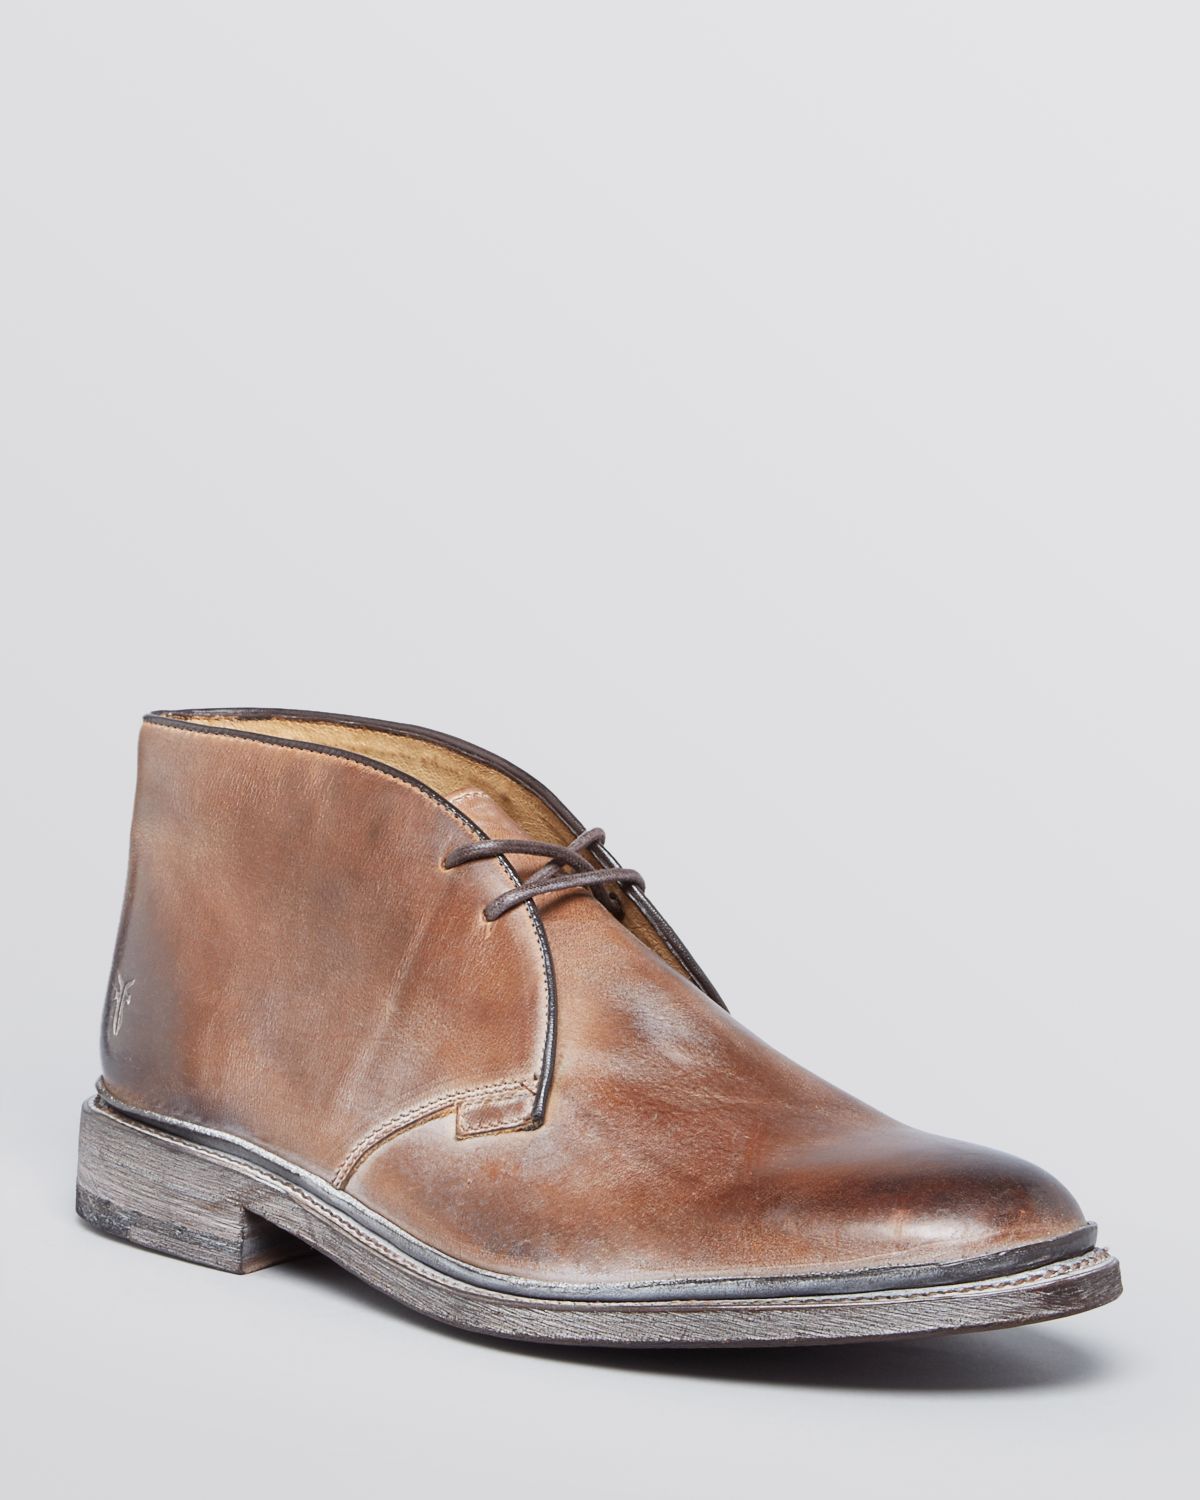 Frye James Leather Chukka Boots in Tan 